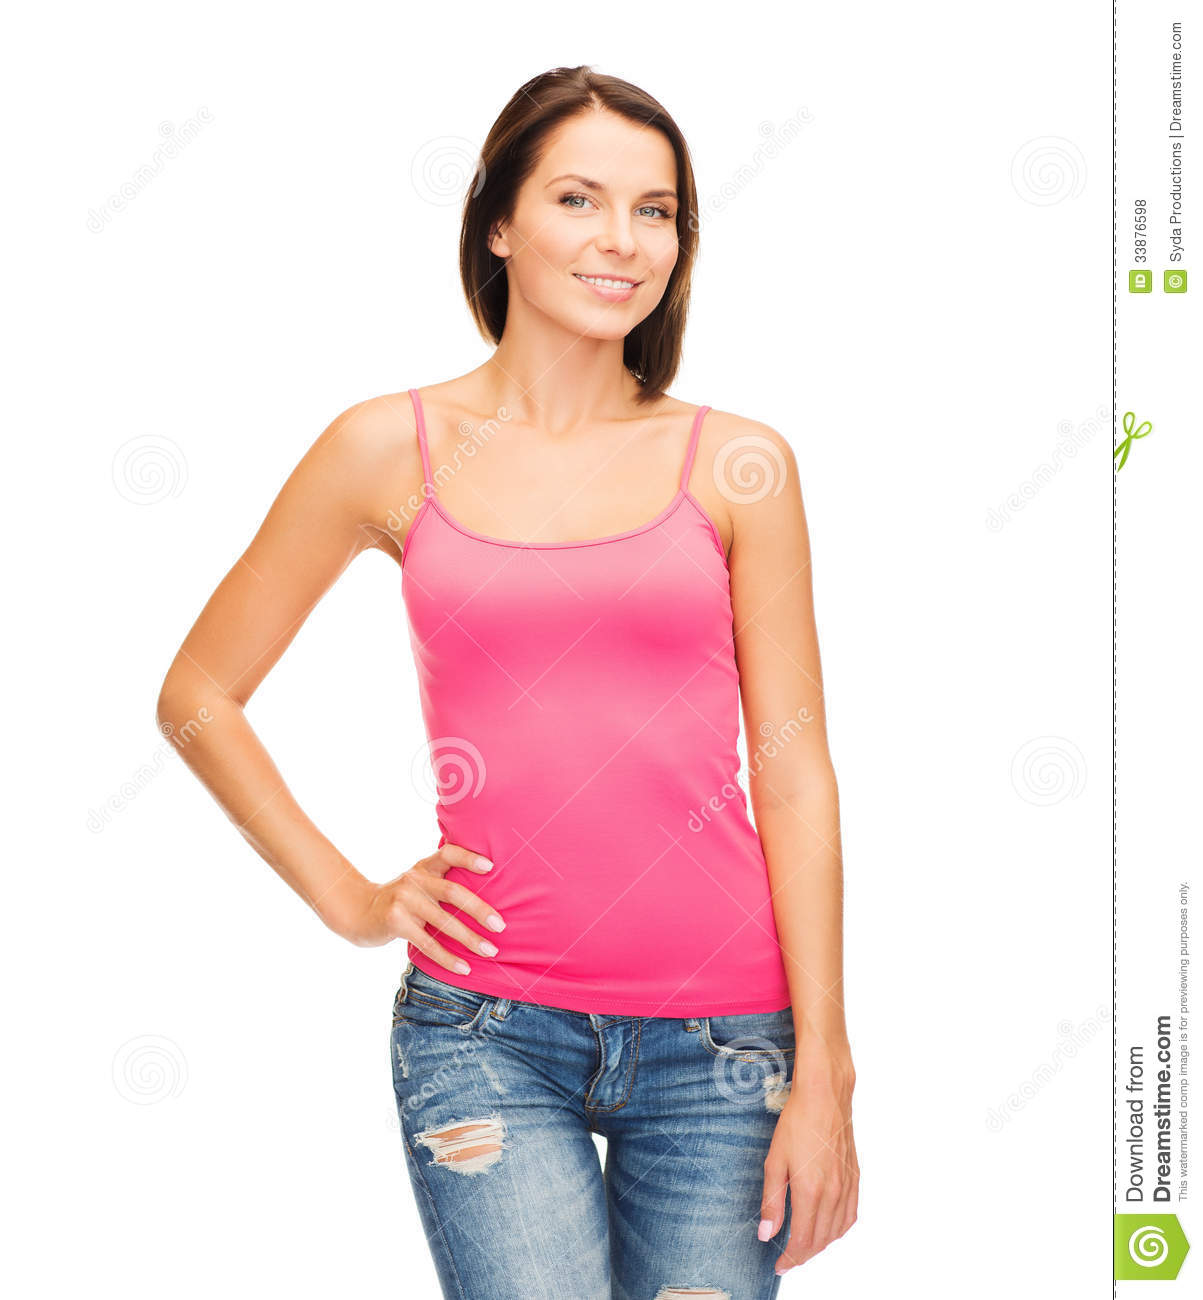 Tank Top Design Concept   Smiling Woman In Blank Pink Tank Top 